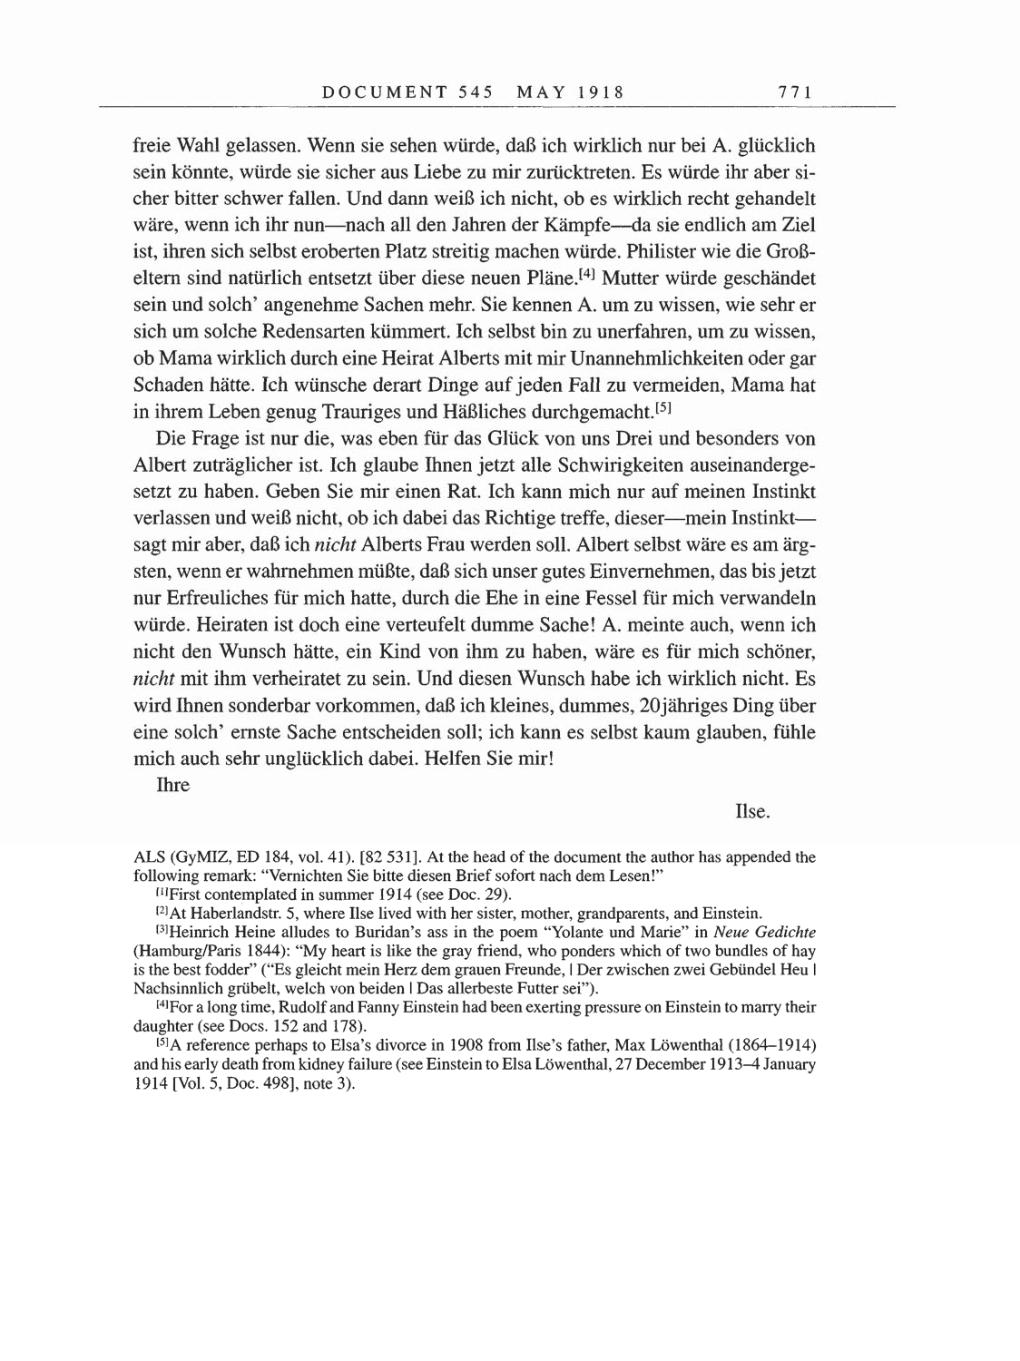 Volume 8, Part B: The Berlin Years: Correspondence 1918 page 771